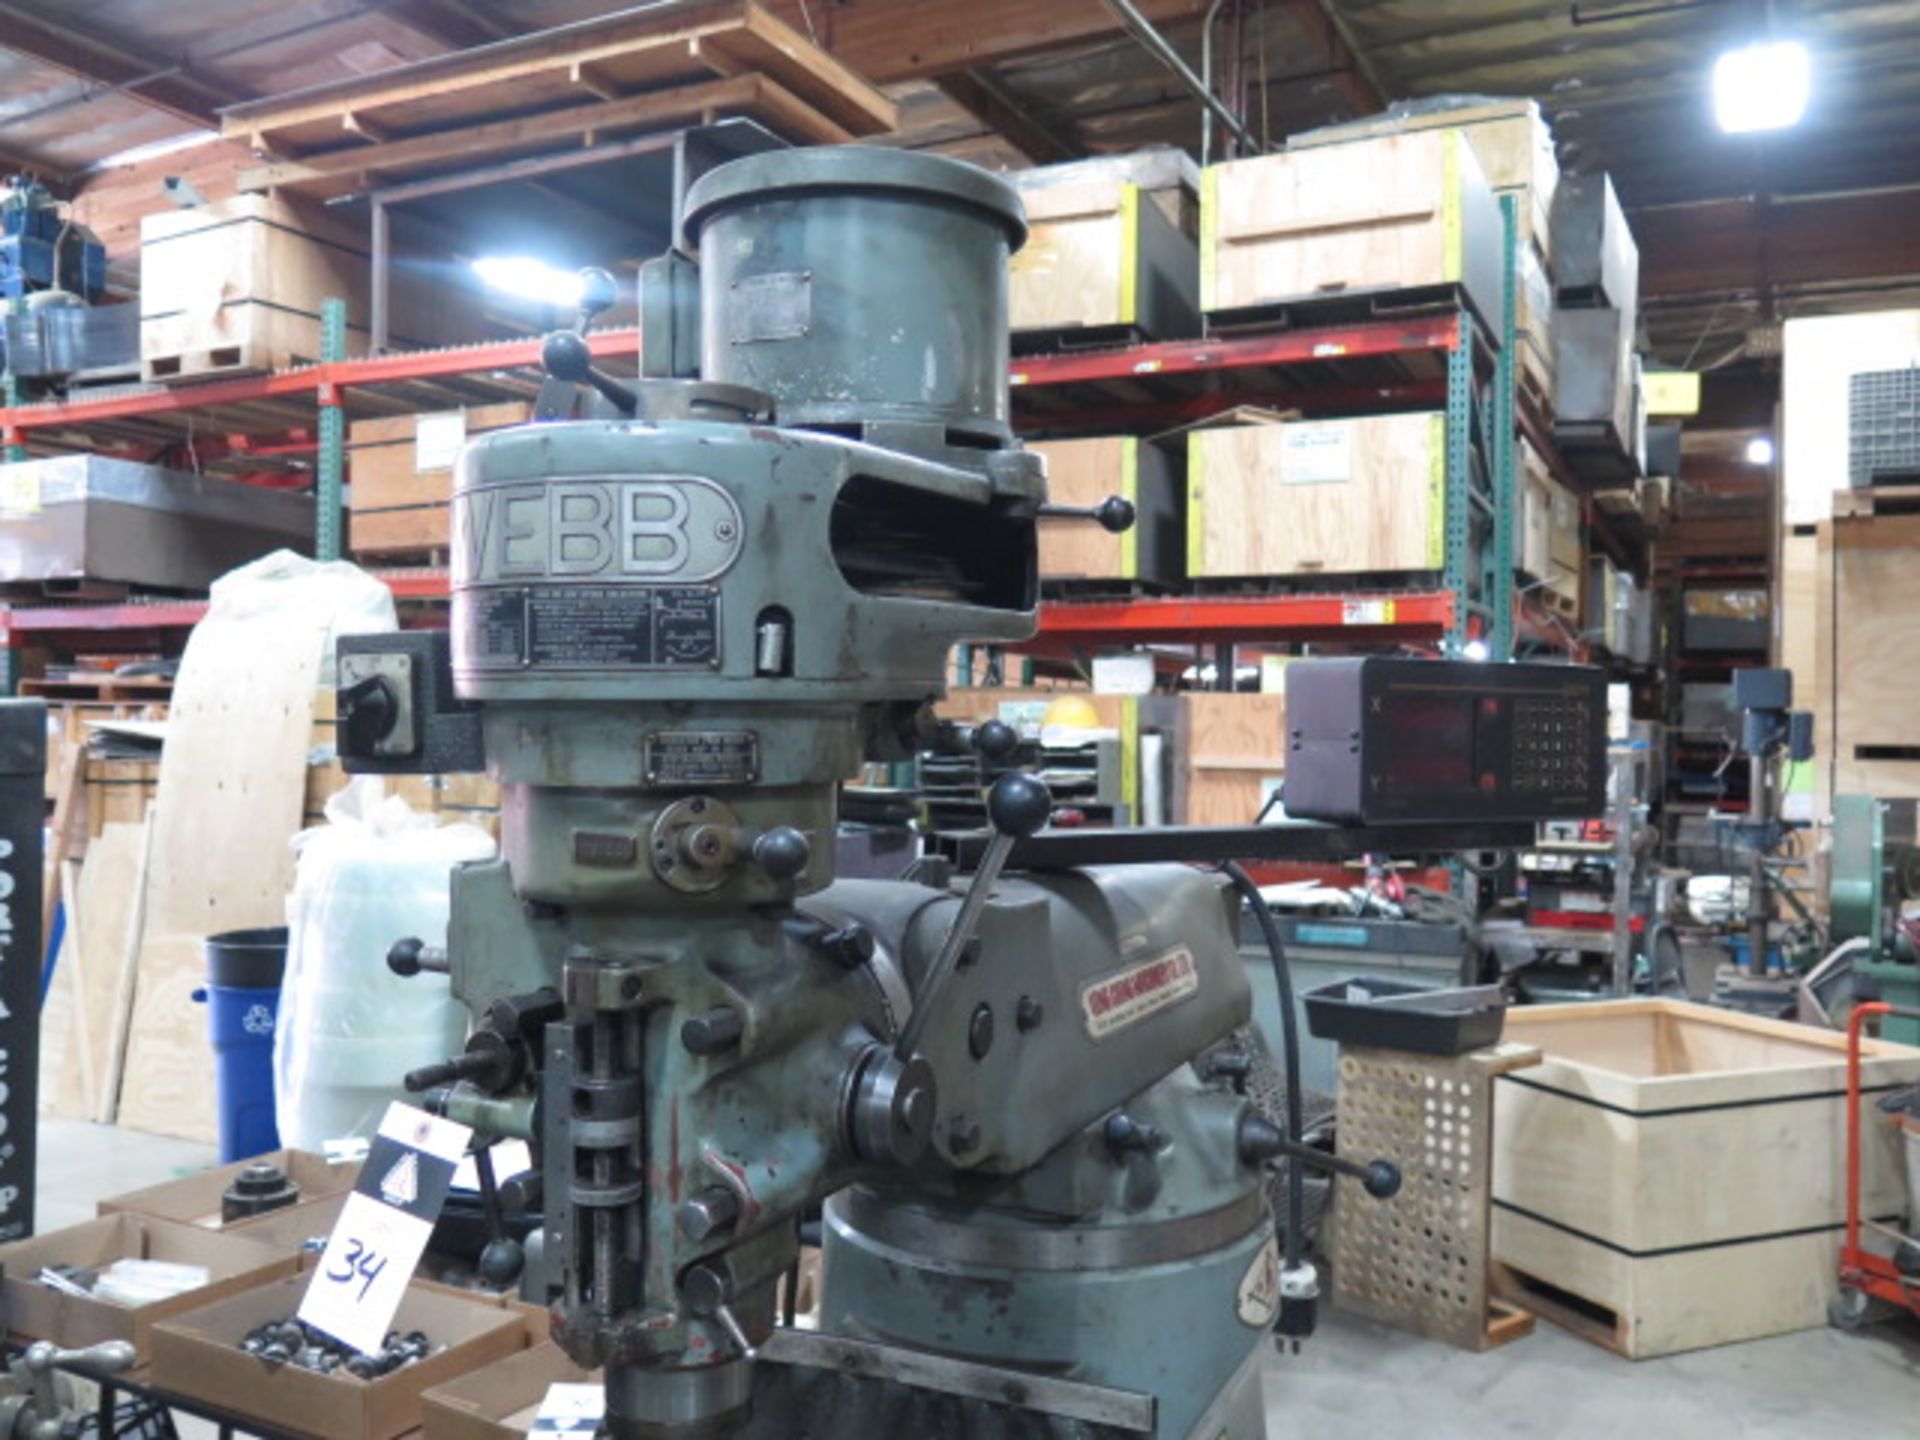 Webb Vertical Mill s/n 7131551 w/ 2Hp Motor, 80-2760 RPM, 9” x 47” Table (SOLD AS-IS - NO WARRANTY) - Image 3 of 7